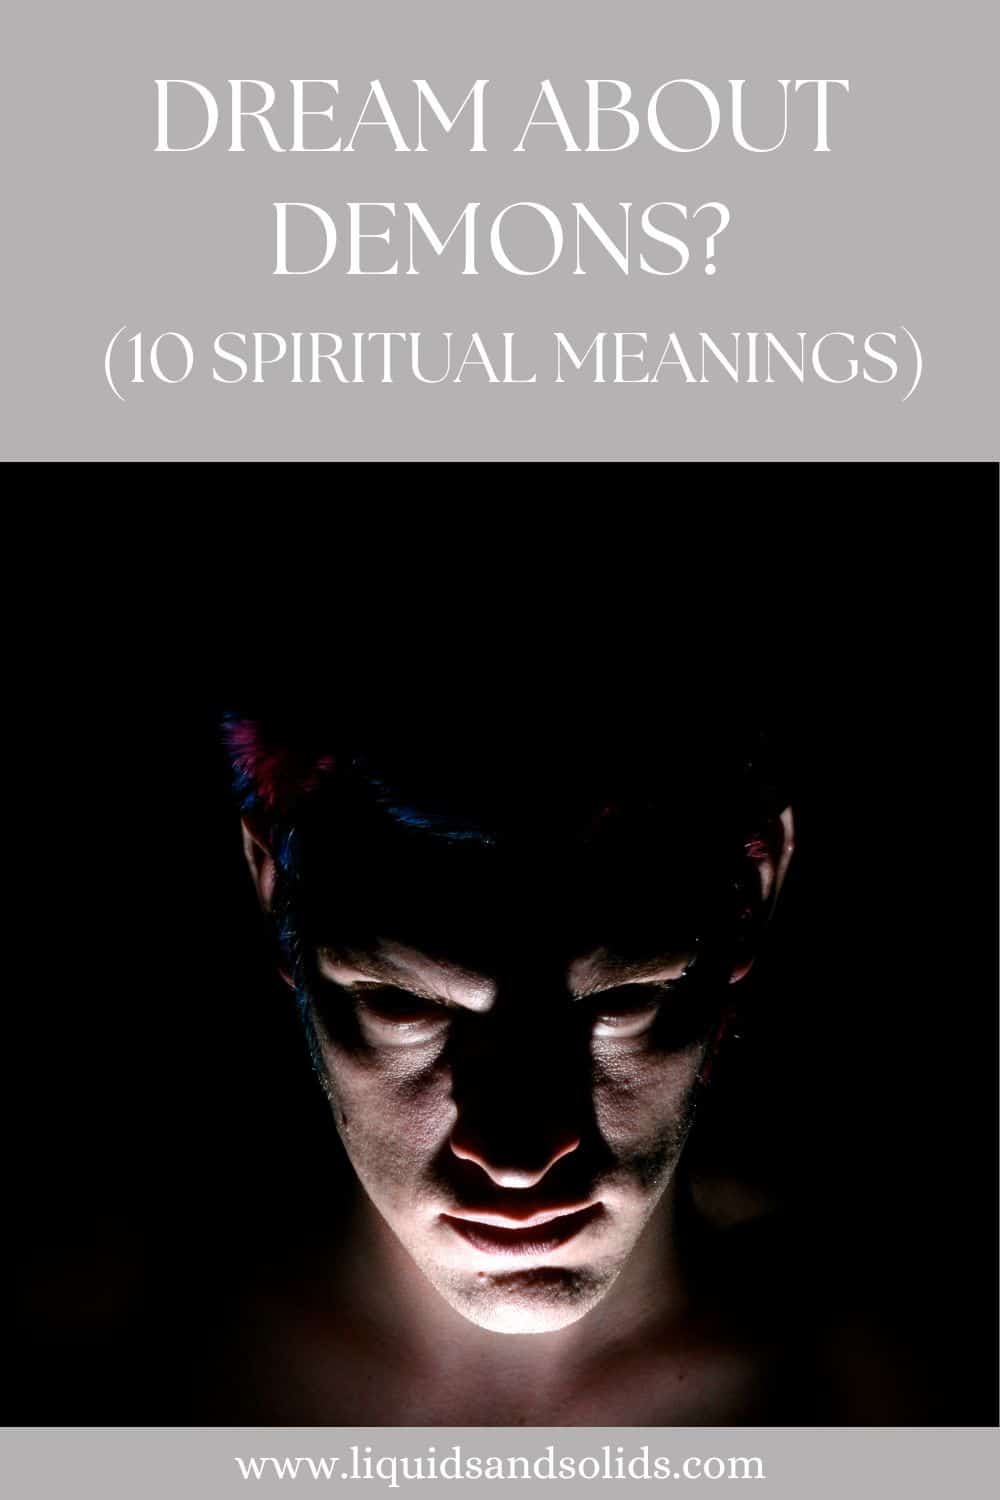 Dream About Demons? (10 Spiritual Meanings)